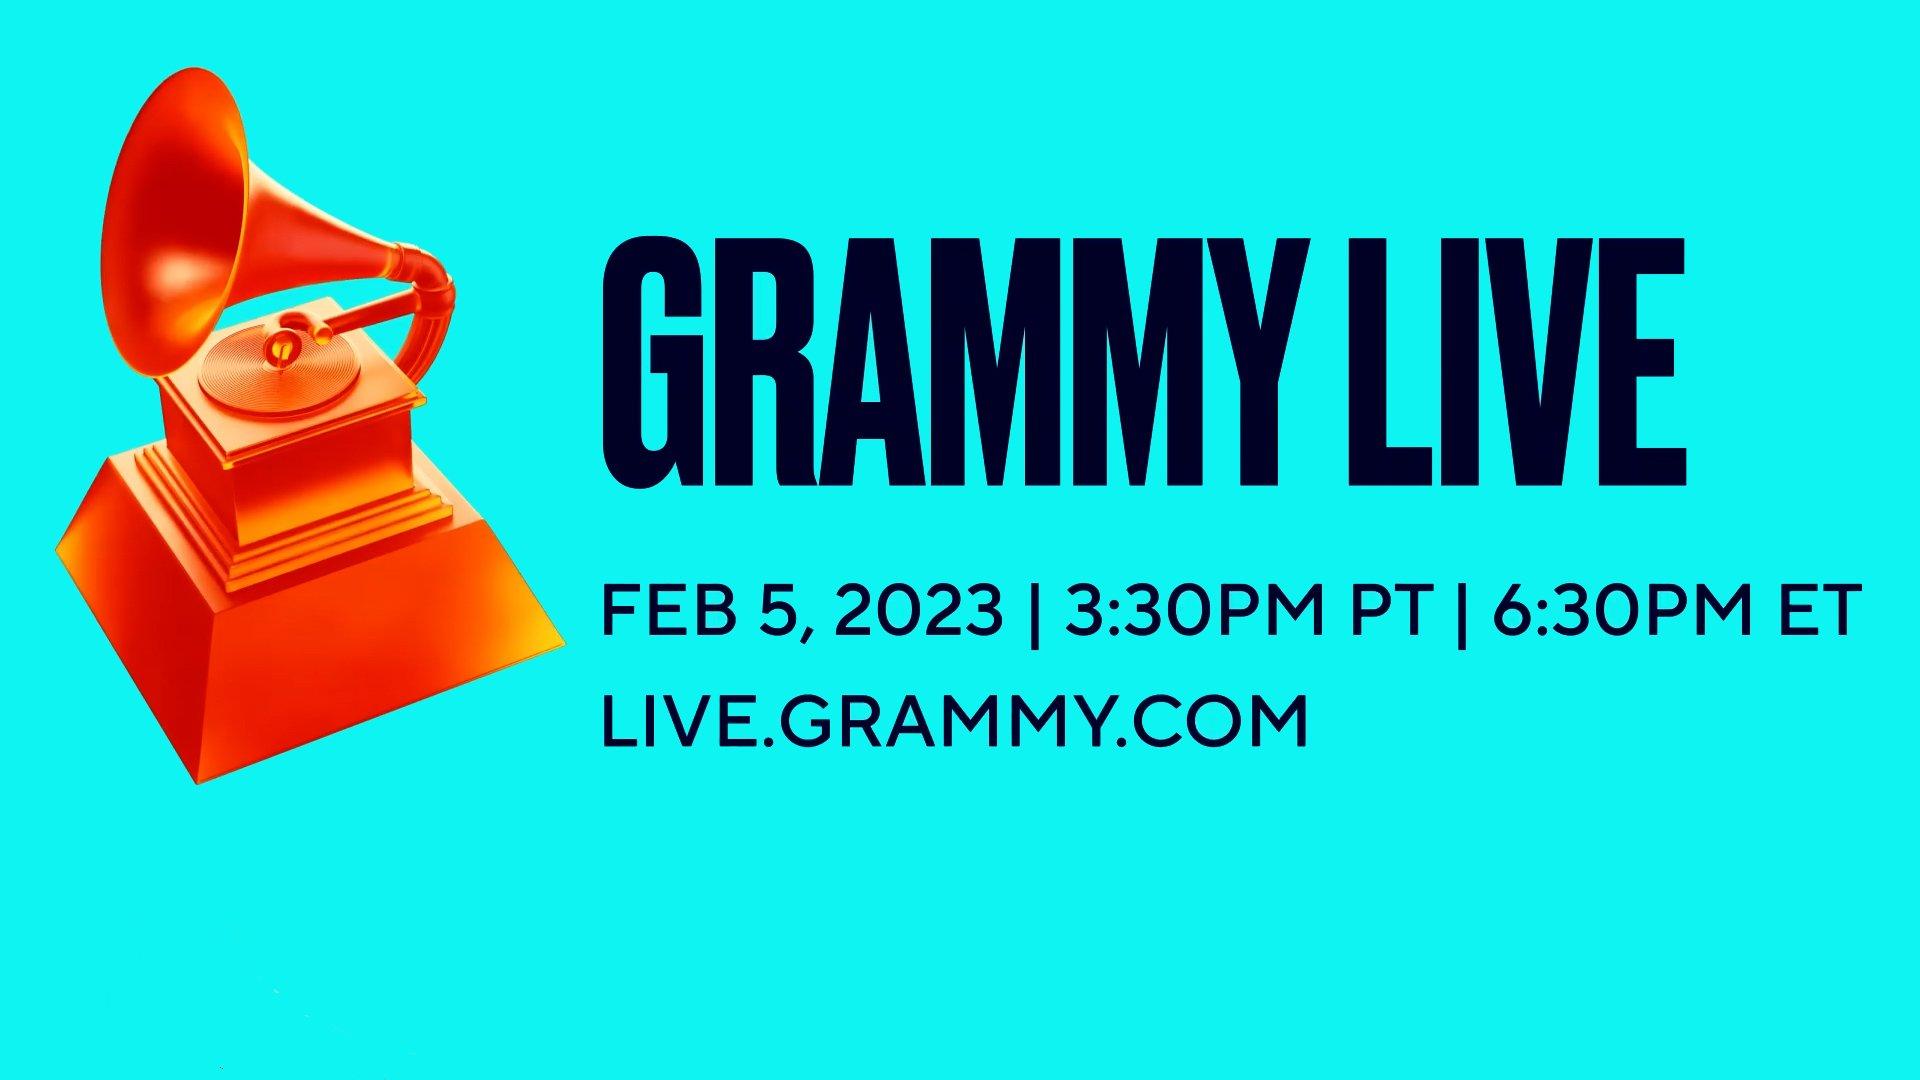 Your Online Destination For The 2023 GRAMMYs